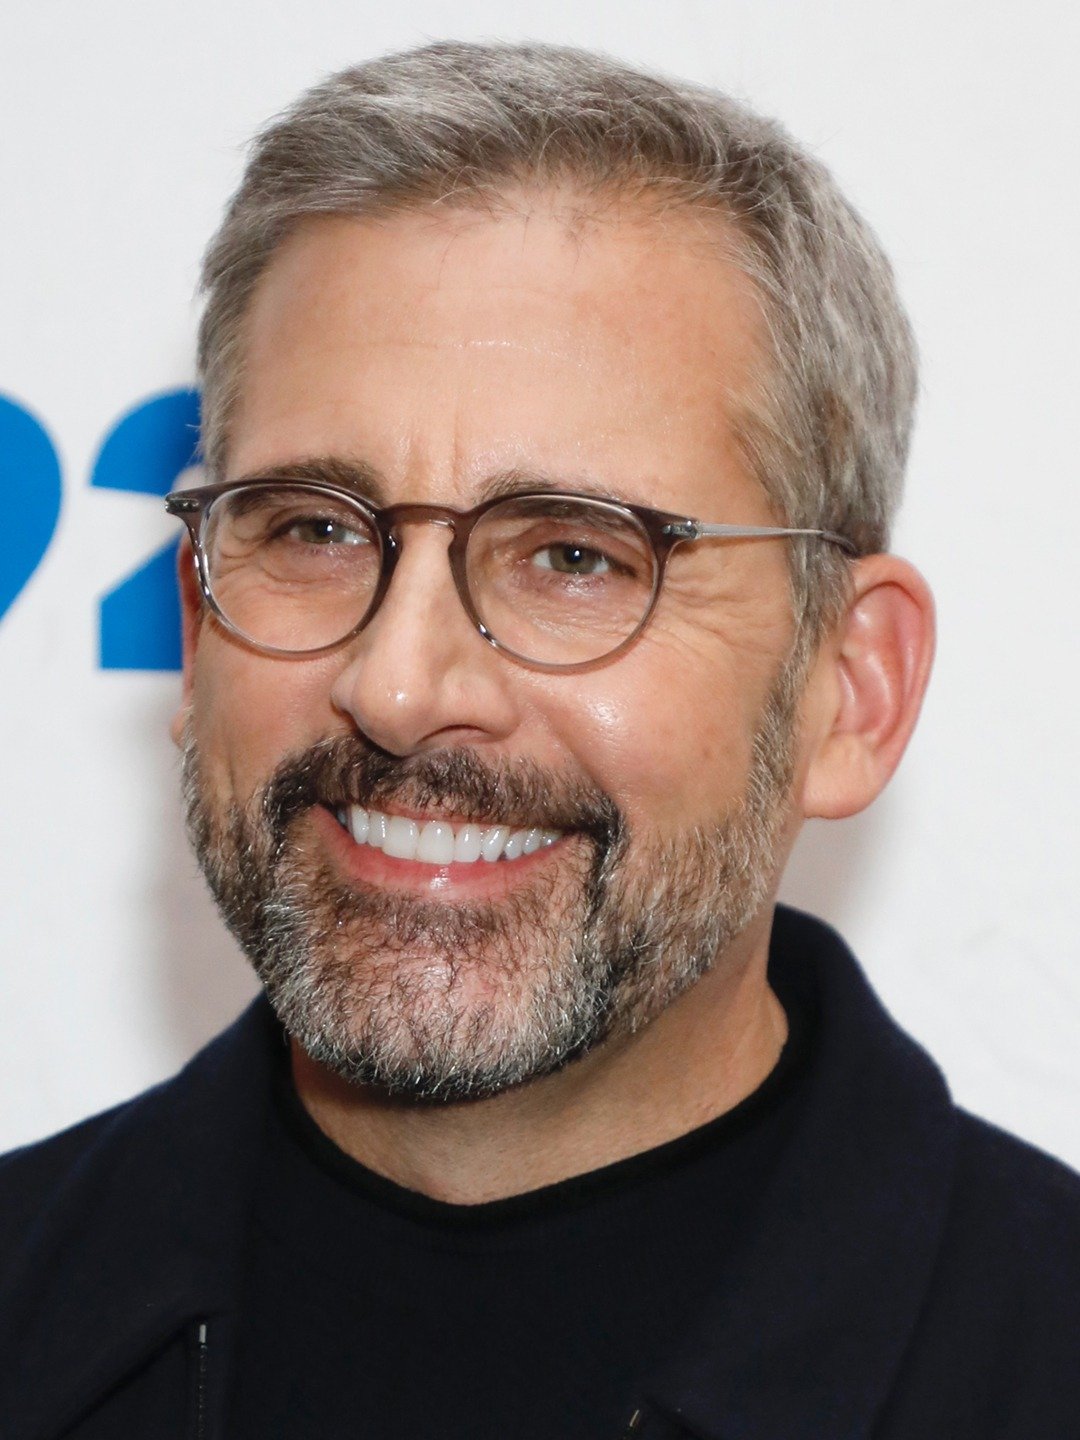 Young Steve Carell